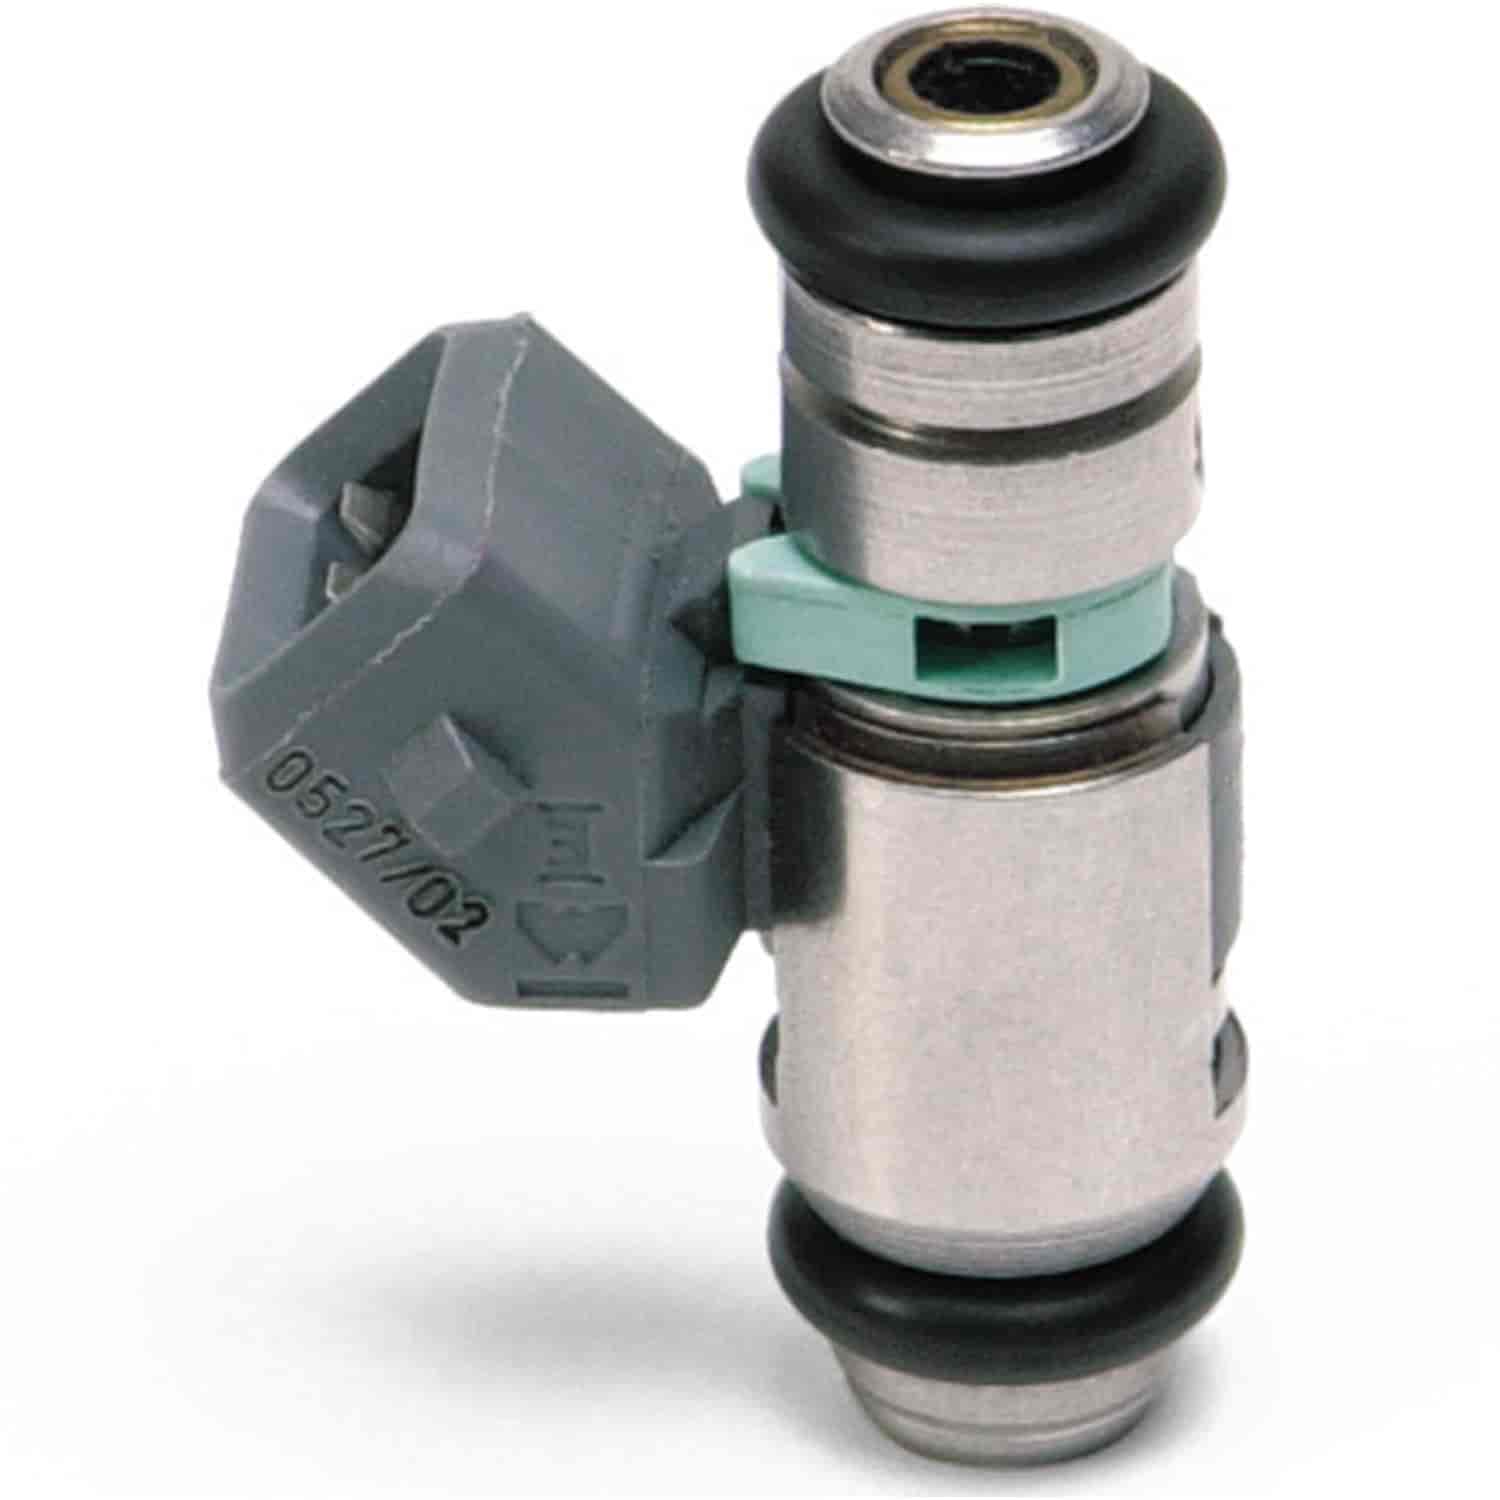 Pico Fuel Injector 19lbs/hr @ 45 psi, 185cc/minute